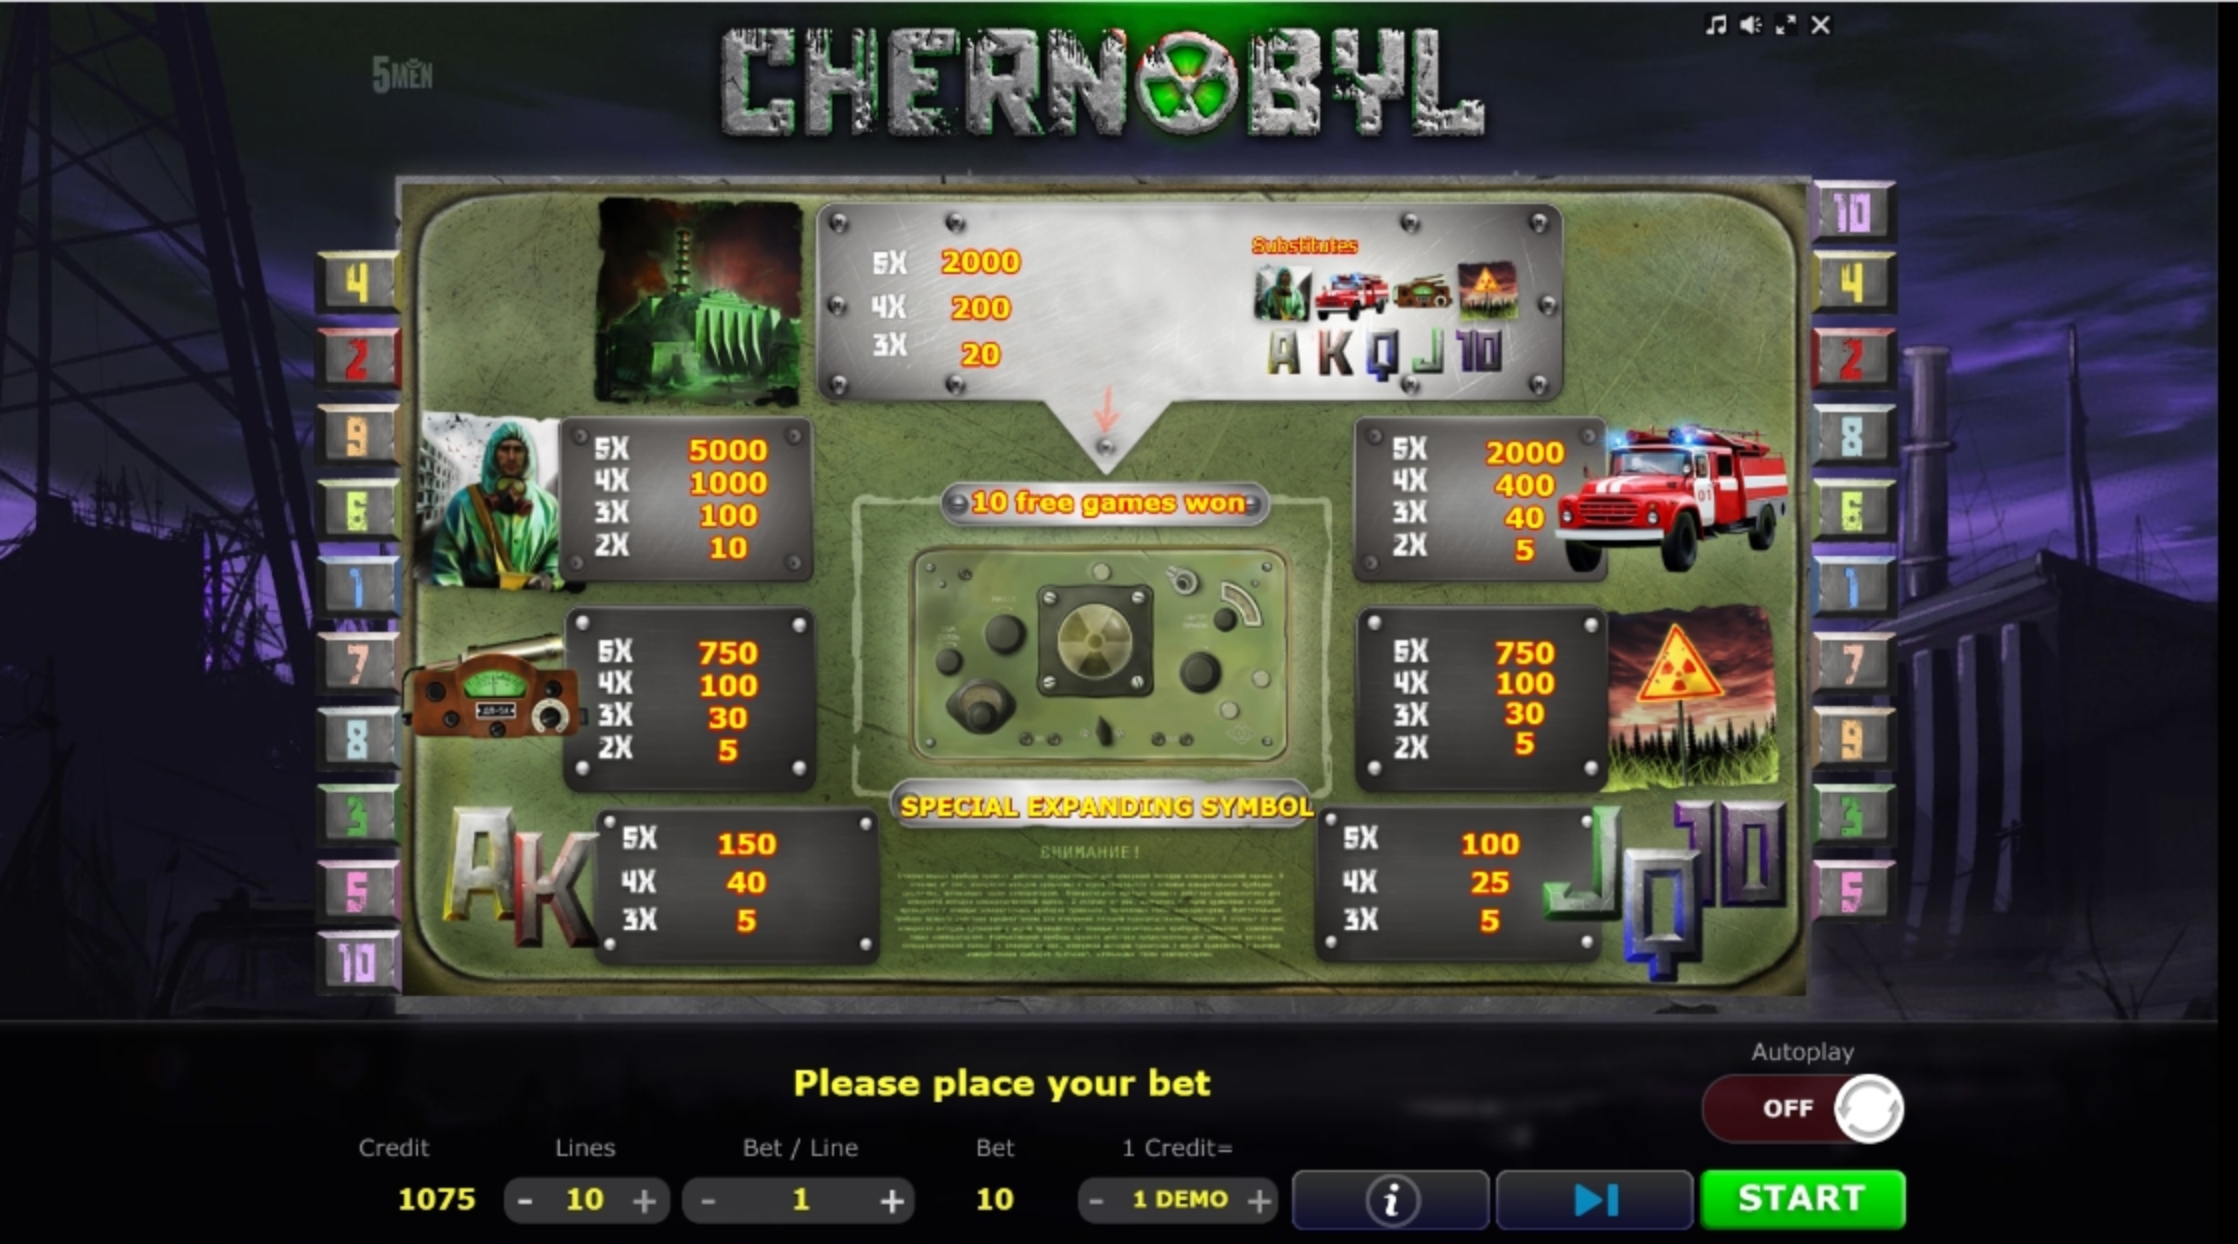 Info of Chernobyl Slot Game by Five Men Games